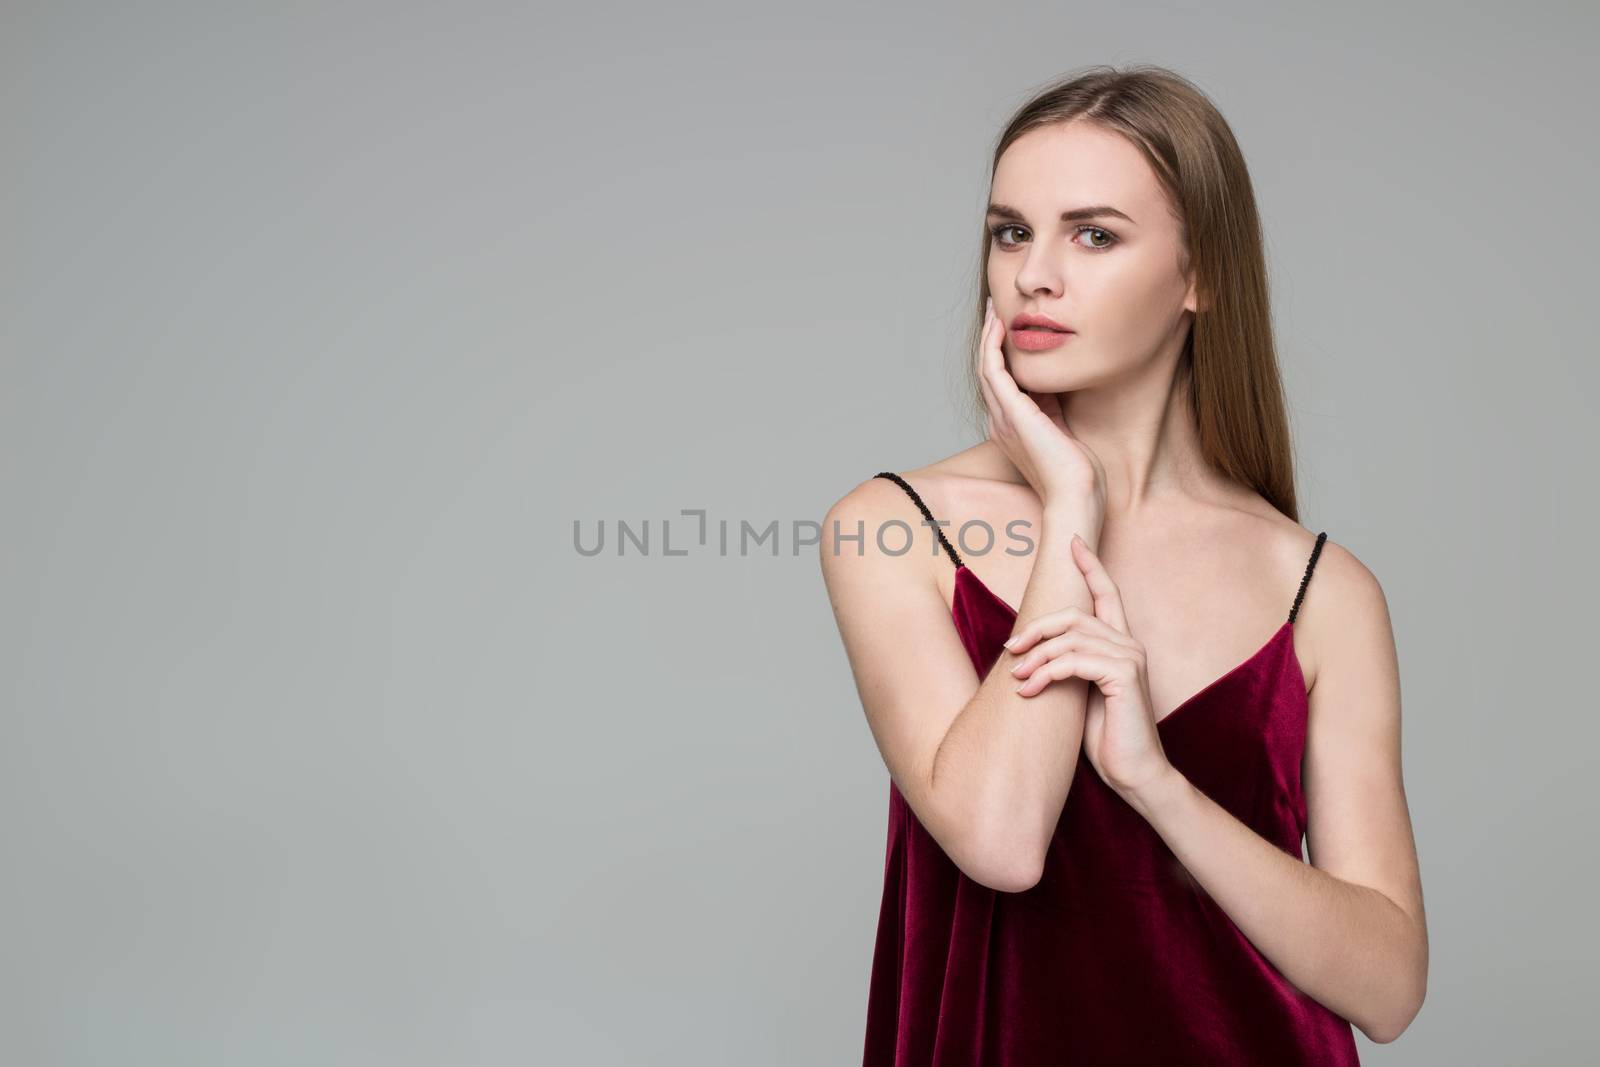 Blond girl in red dress poses showing emotions: wistfulness, mus by VeraVerano